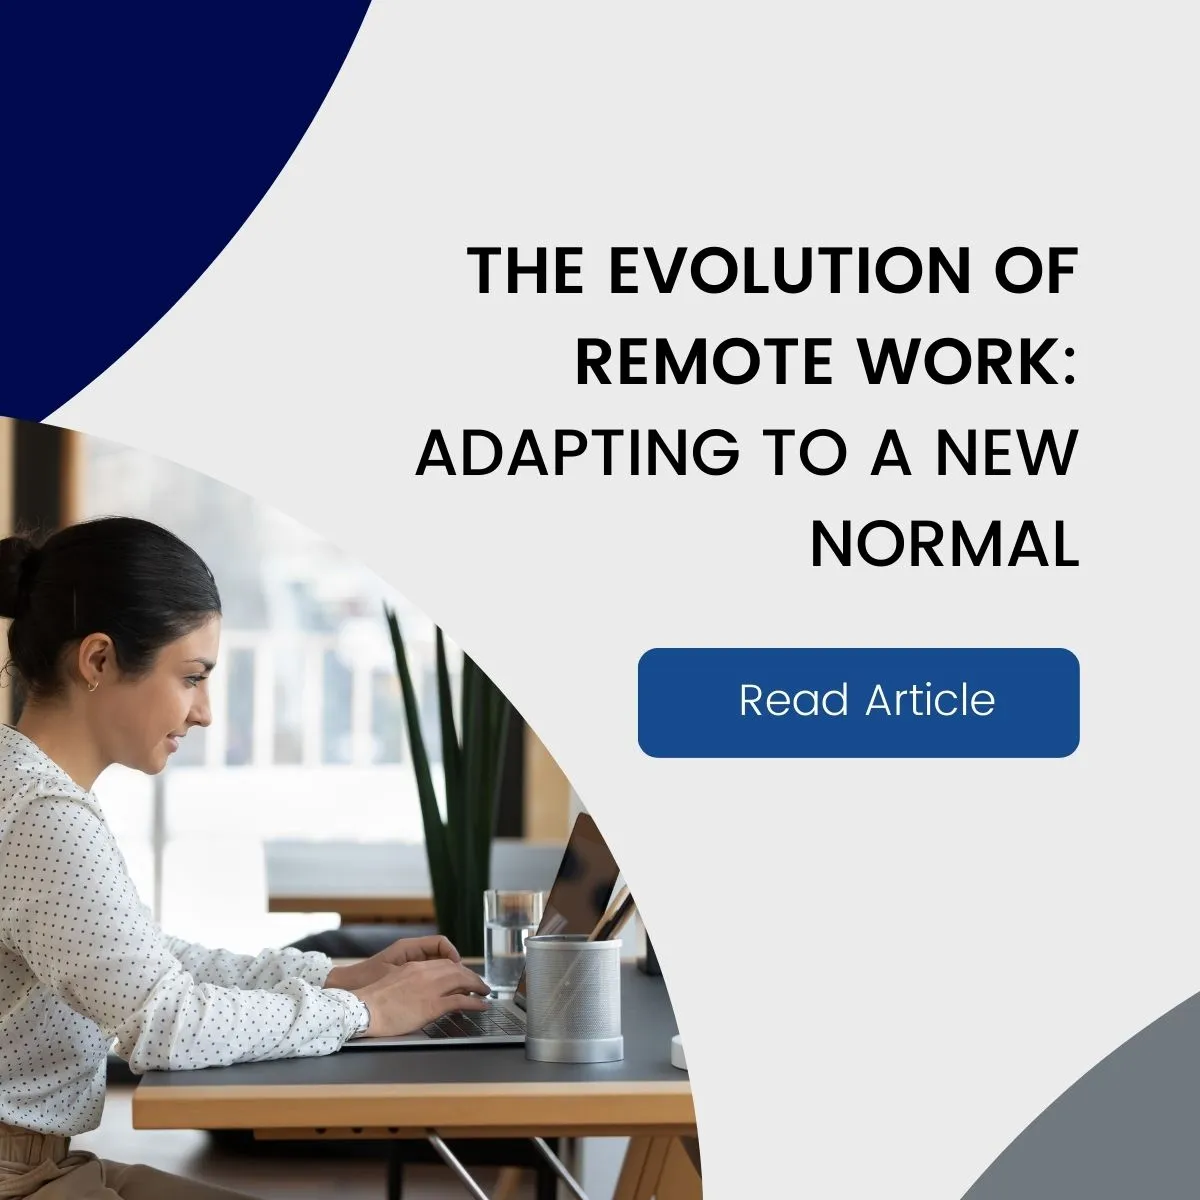 The Evolution of Remote Work: Adapting to a New Normal